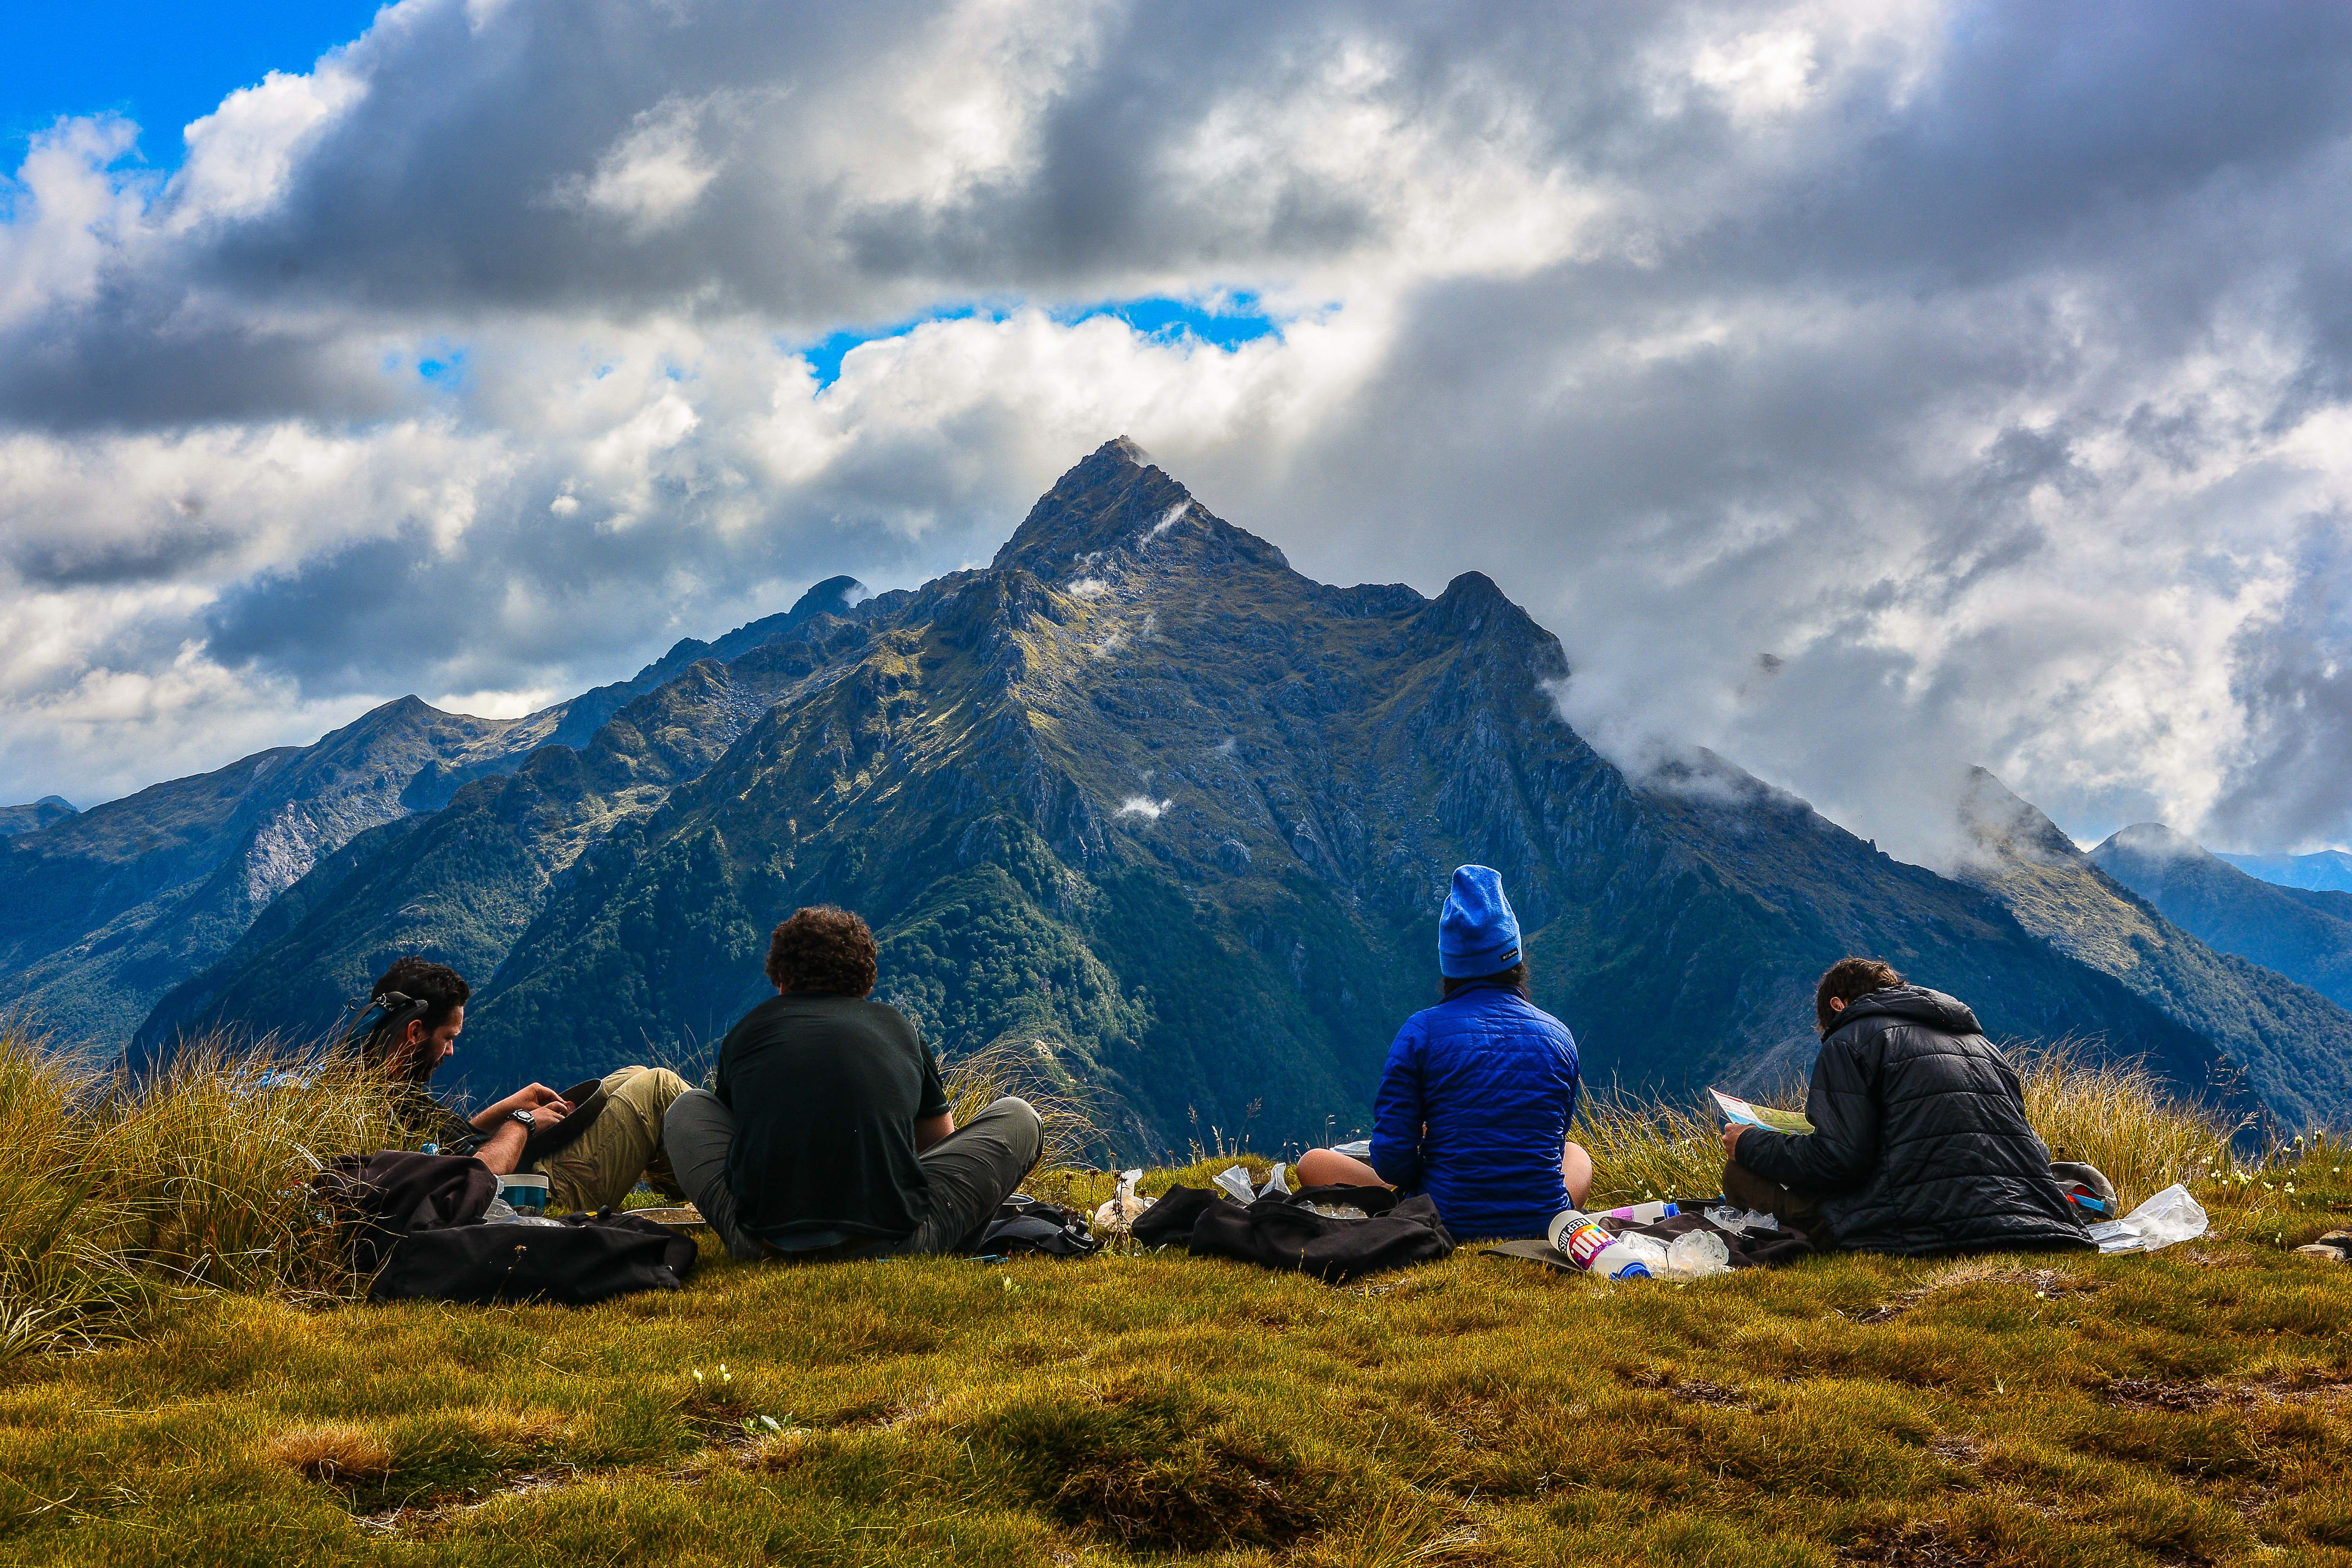 four students sit together looking out at a craggy mountain peak in New Zealand with puffy clouds overhead